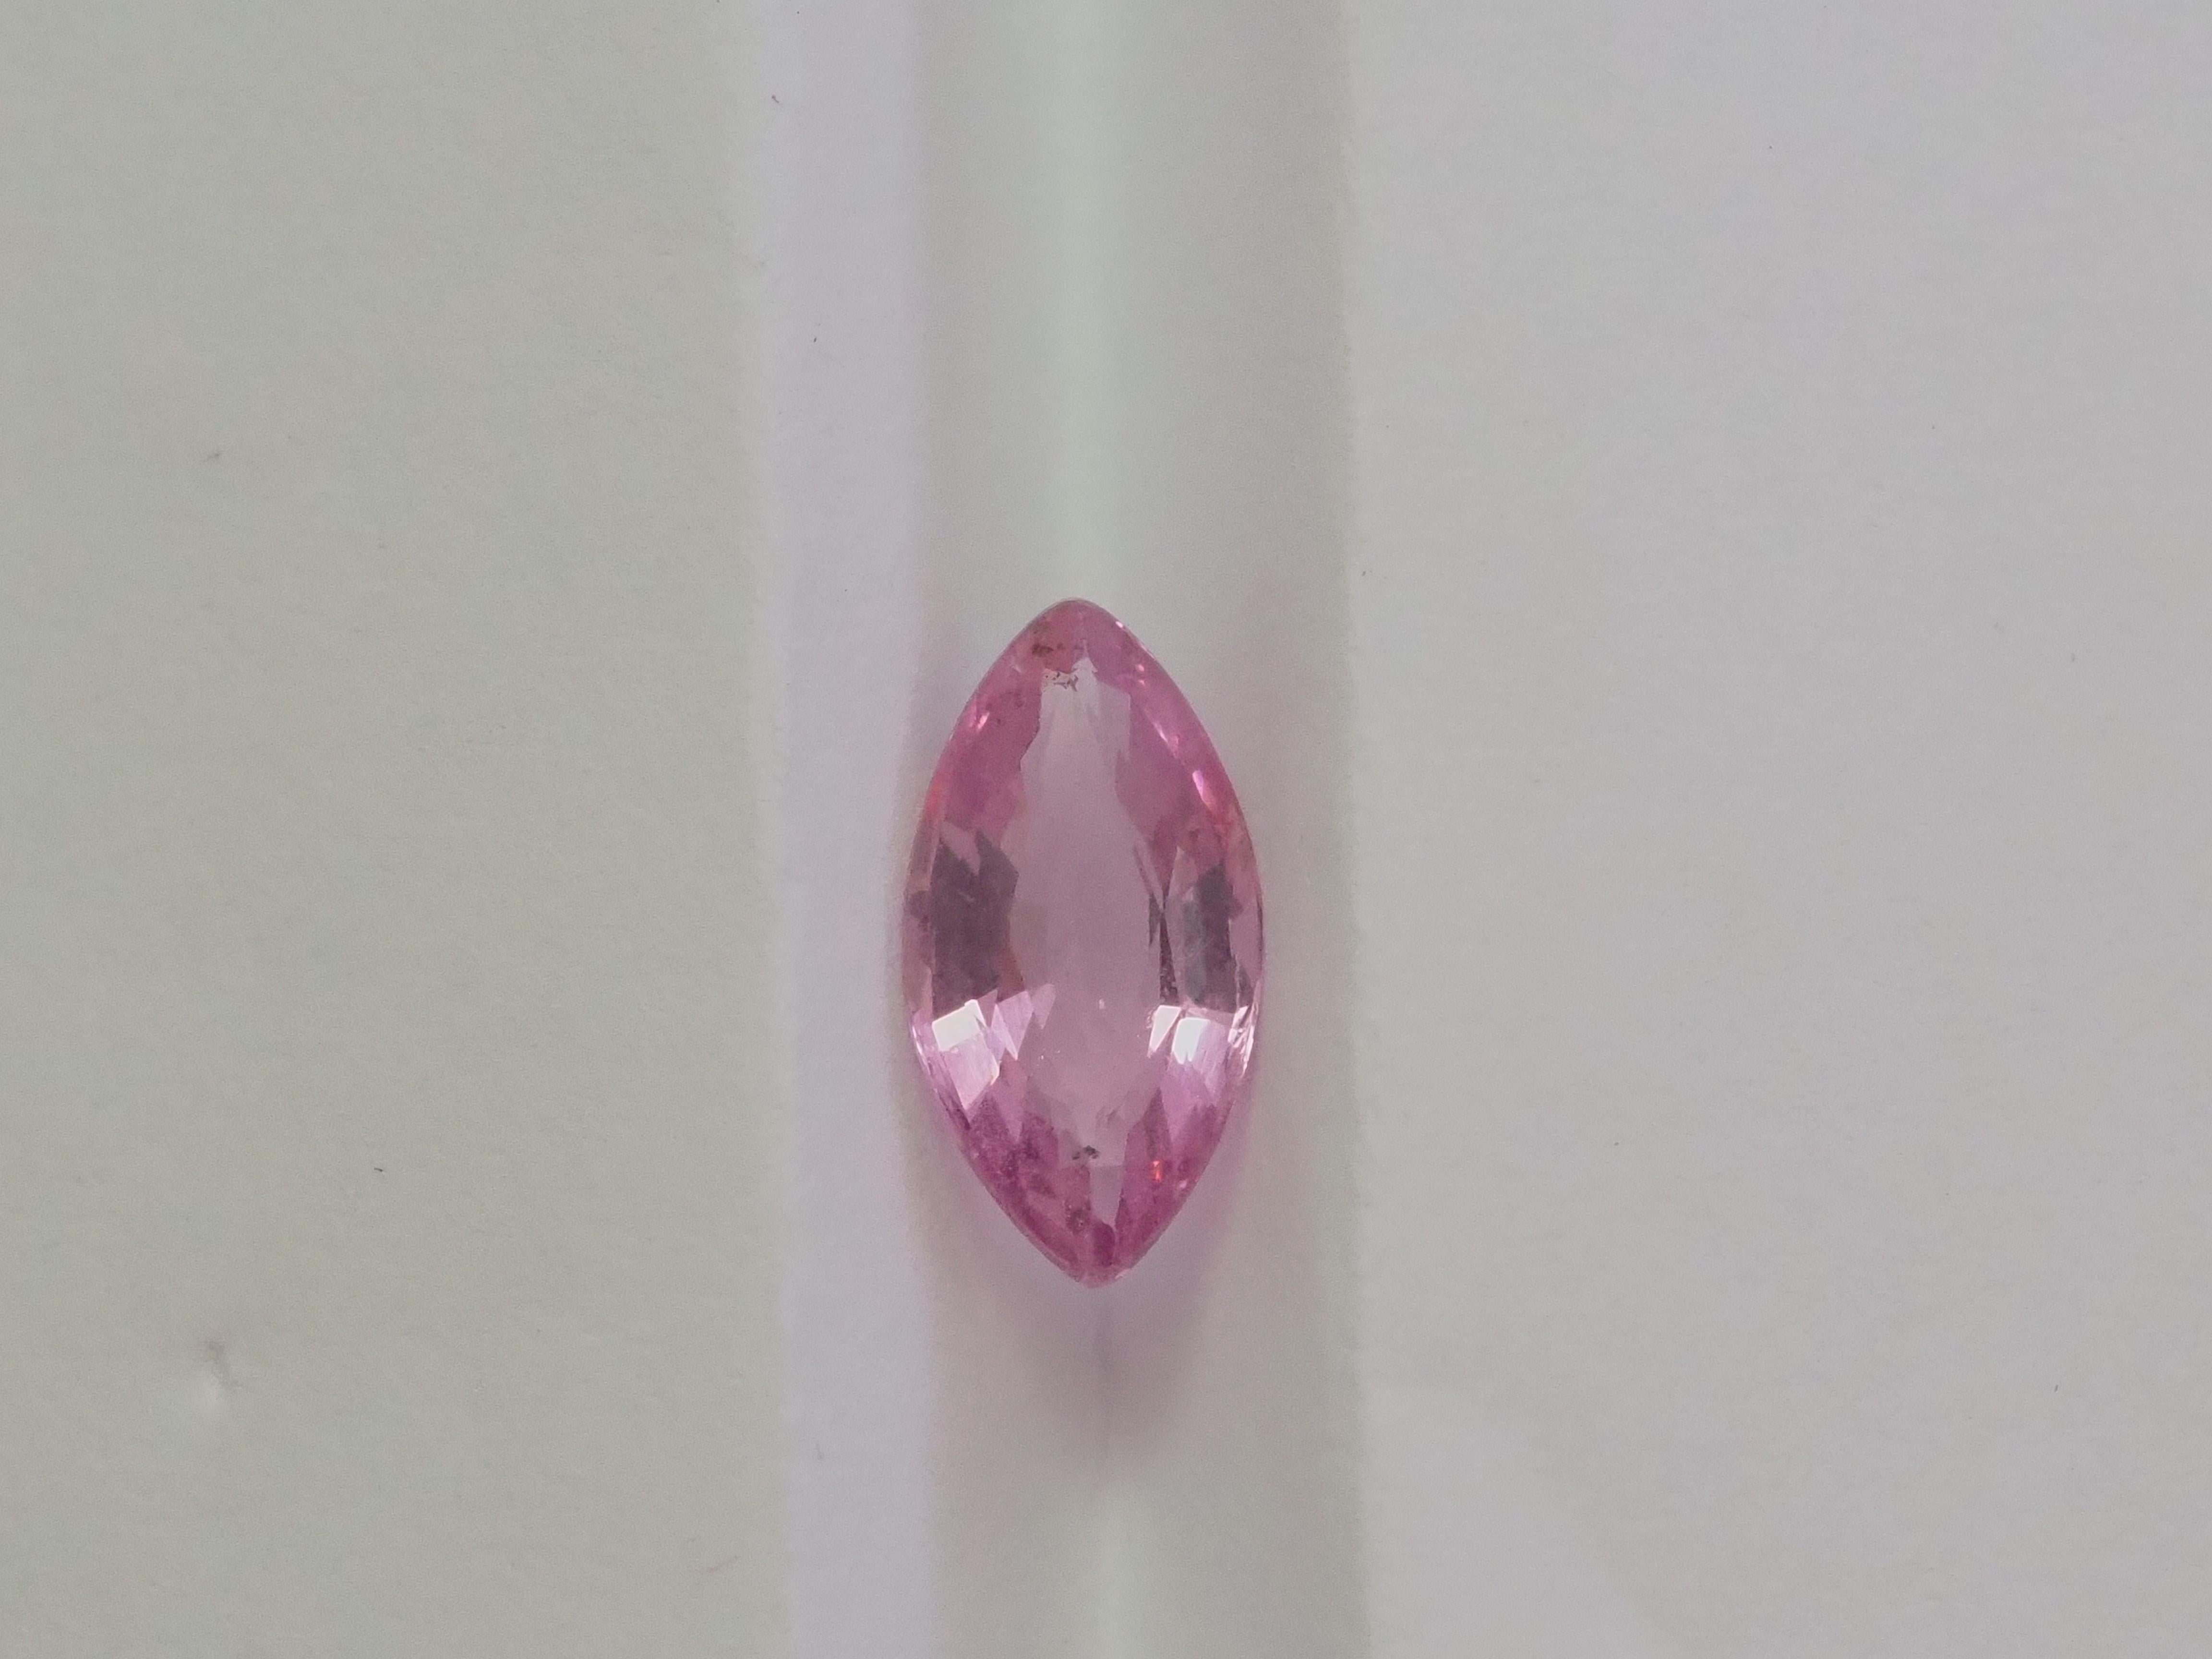 Eye clean- VVS

This particular gem measures approximately 5.08x9.79x3.25 mm, providing ample space for intricate and creative jewelry designs. 

Popular bright pink color marquise cut Burma spinel with GLC lab report card.
Weight= 1.25 carats

The